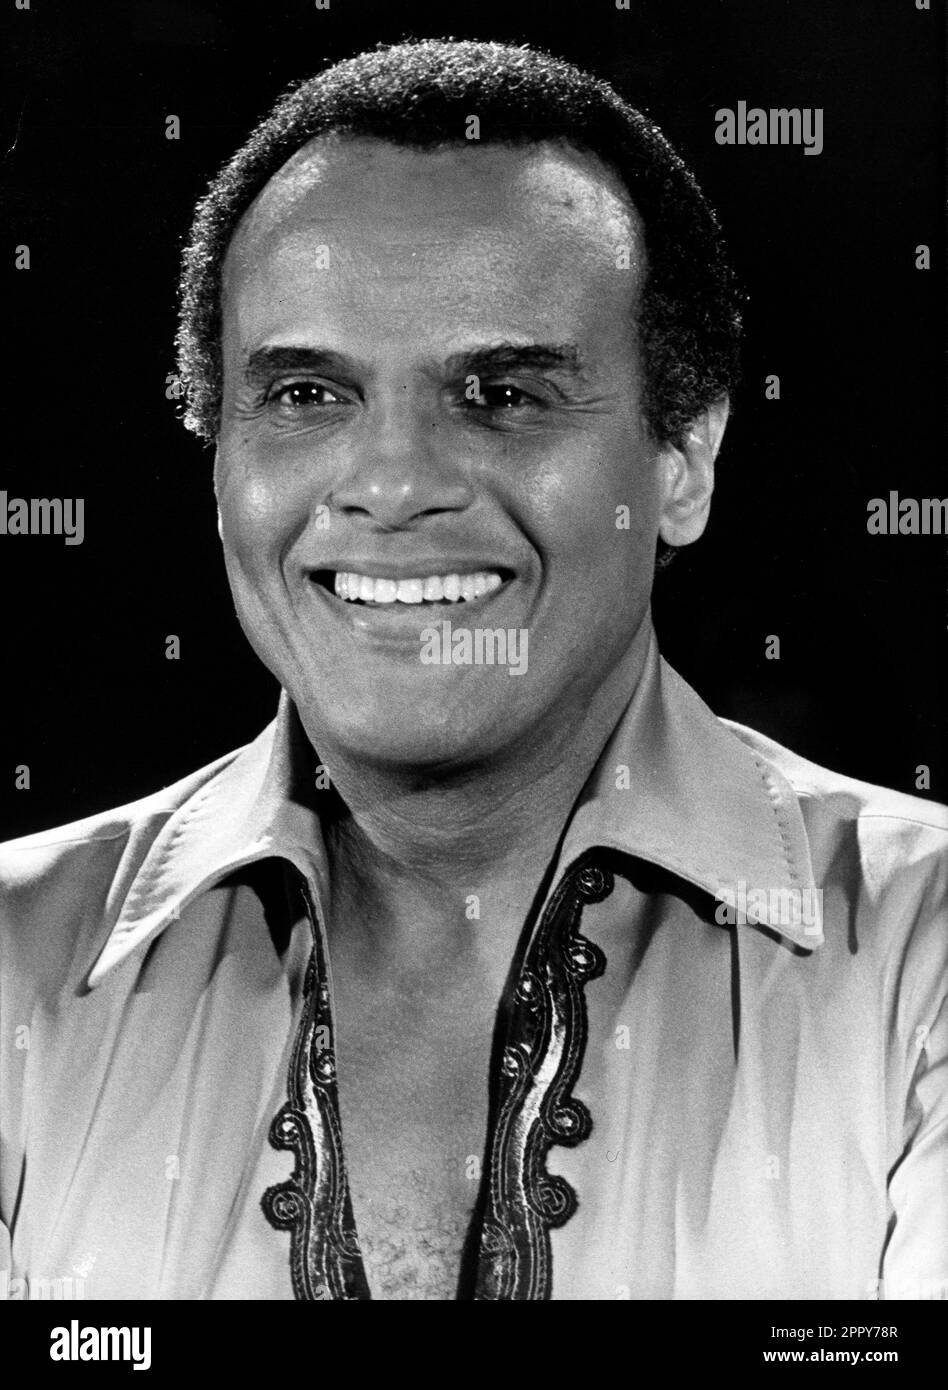 April 25, 2023: HARRY BELAFONTE, the dashing singer, actor and activist who became an indispensable supporter of the civil rights movement, has died according to his publicist Ken Sunshine. He was 96. Belafonte died Tuesday morning of congestive heart failure, Sunshine said. Belafonte was dubbed the ''King of Calypso'' after the groundbreaking success of his 1956 hit, ''The Banana Boat Song (Day-O).'' He also became a movie star after acting in the film adaption of the Broadway musical, ''Carmen Jones.'' FILE PHOTO SHOT ON: Oct. 27, 1956, New York, NEW YORK, USA: Portrait of American calypso s Stock Photo